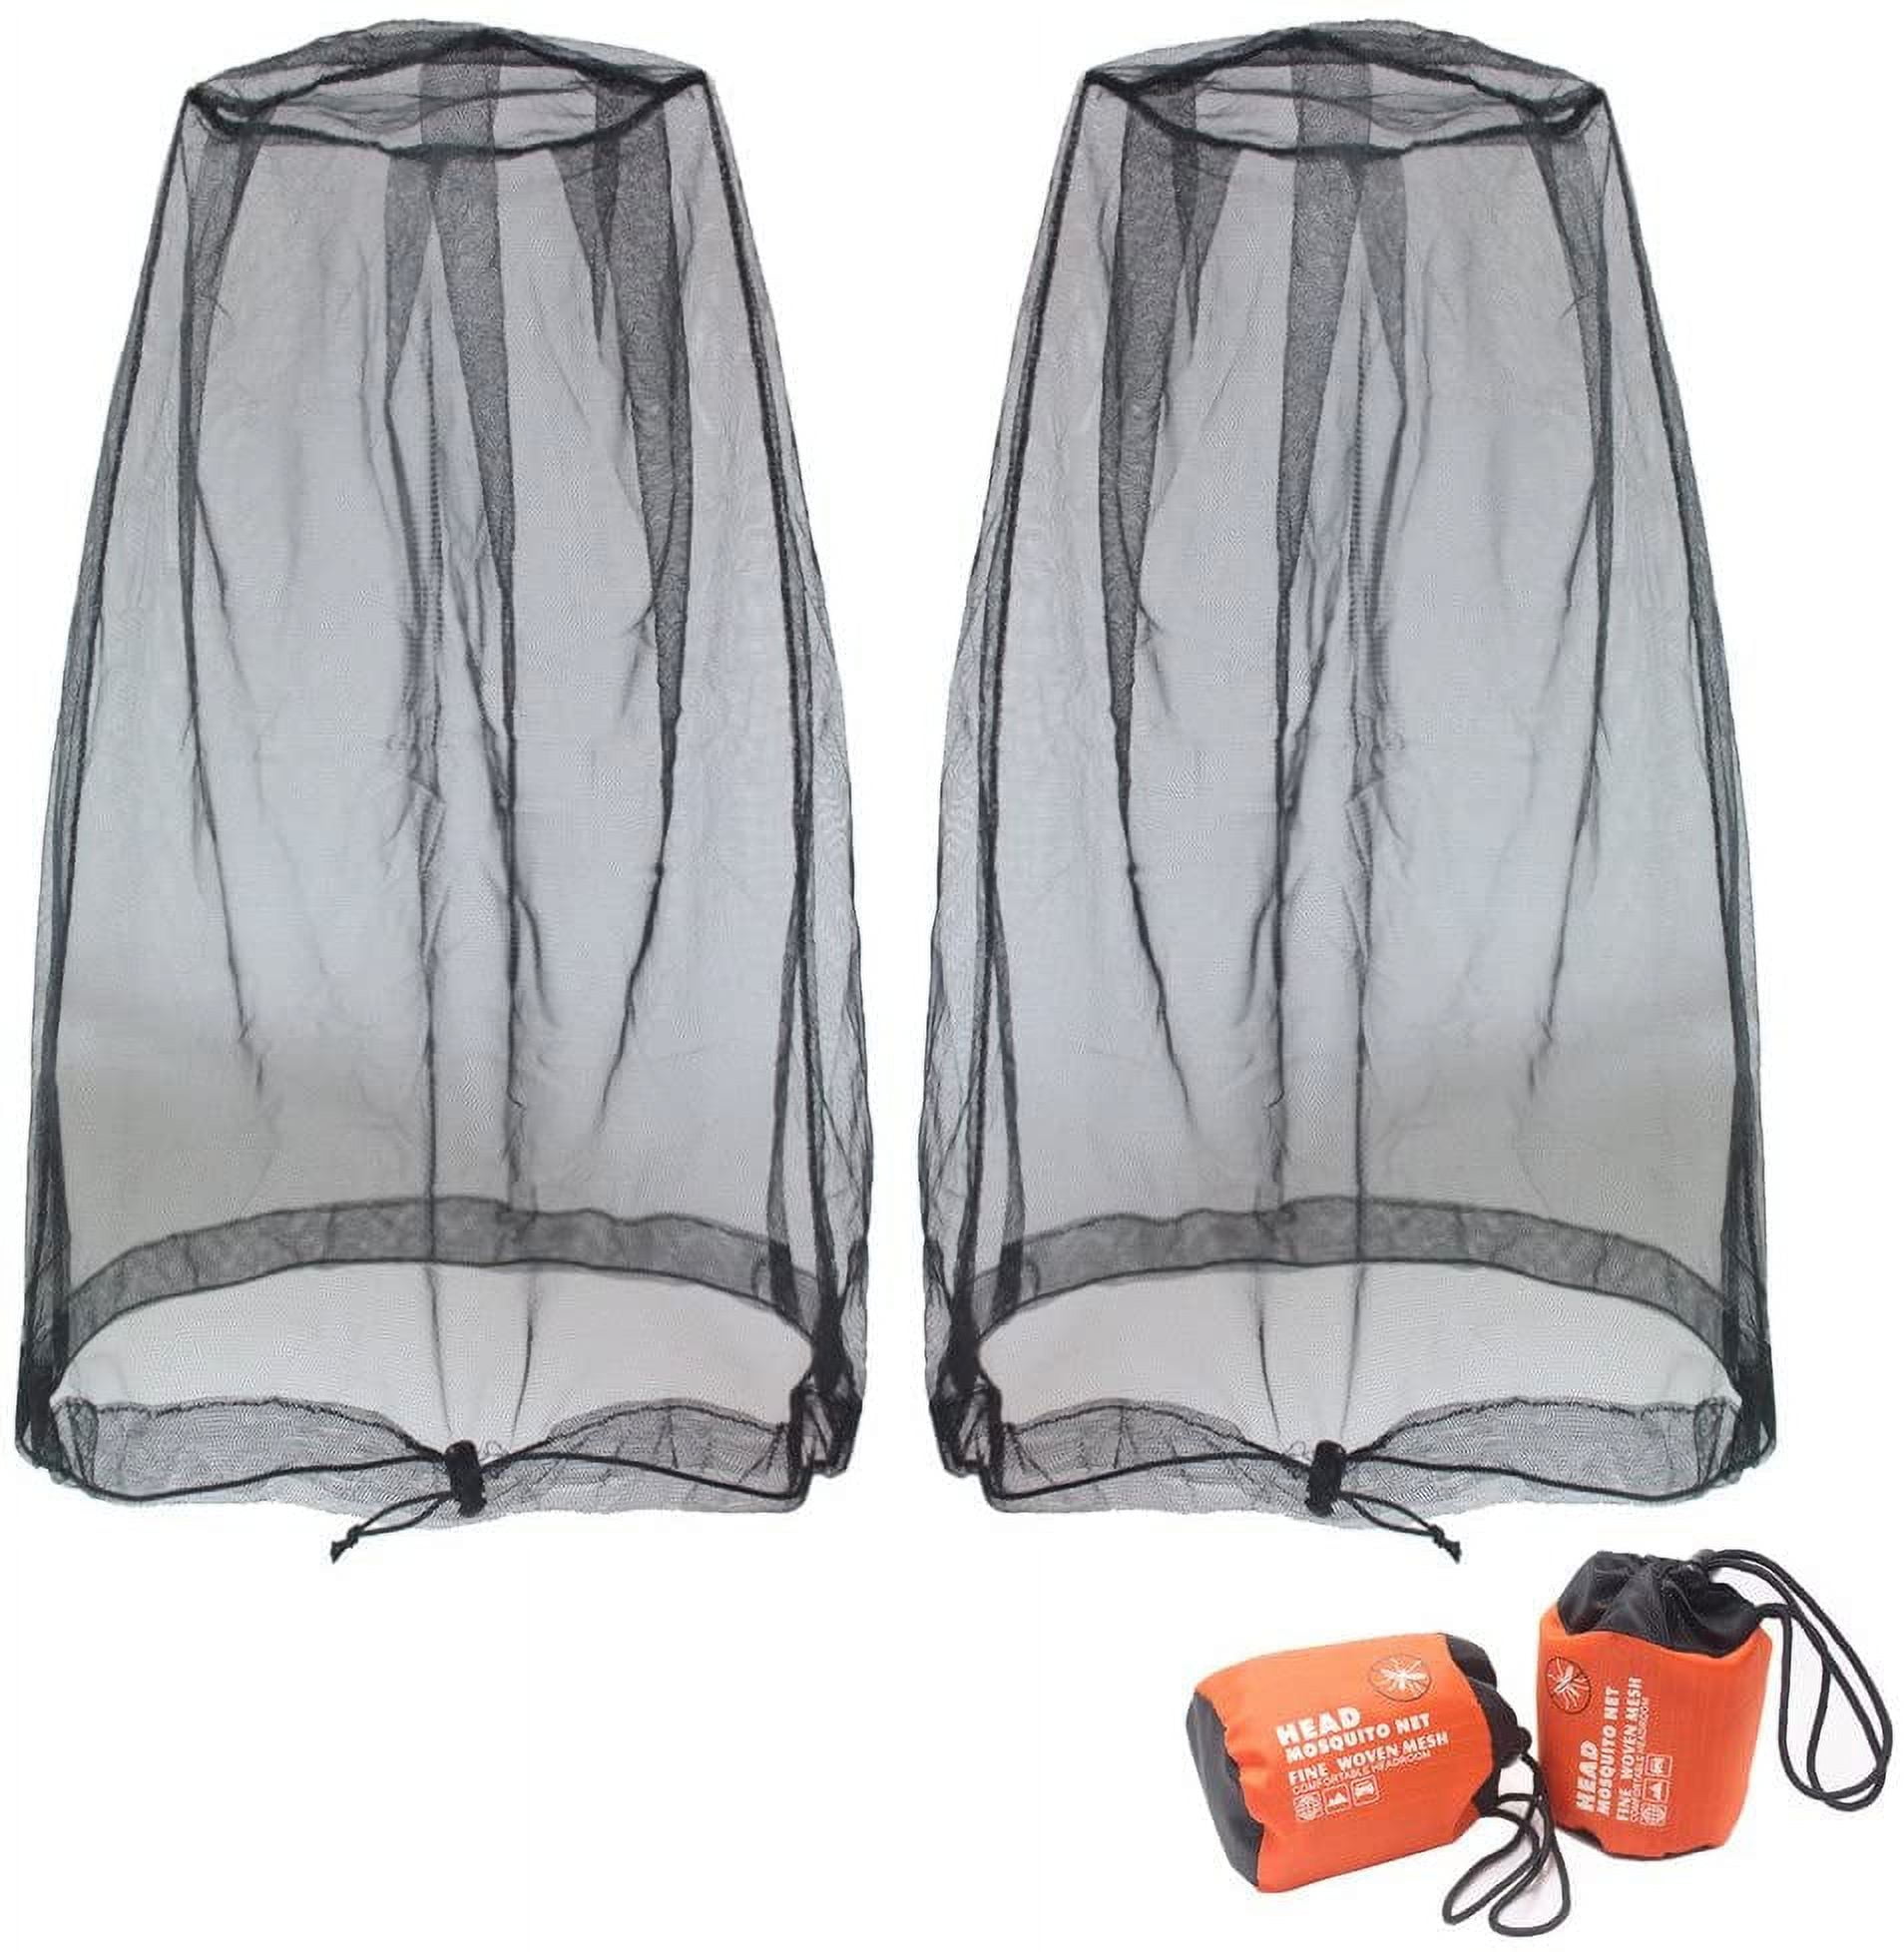 Shatex Head Net Mesh 3-Pieces Fishing Camping Mesh Face Protector